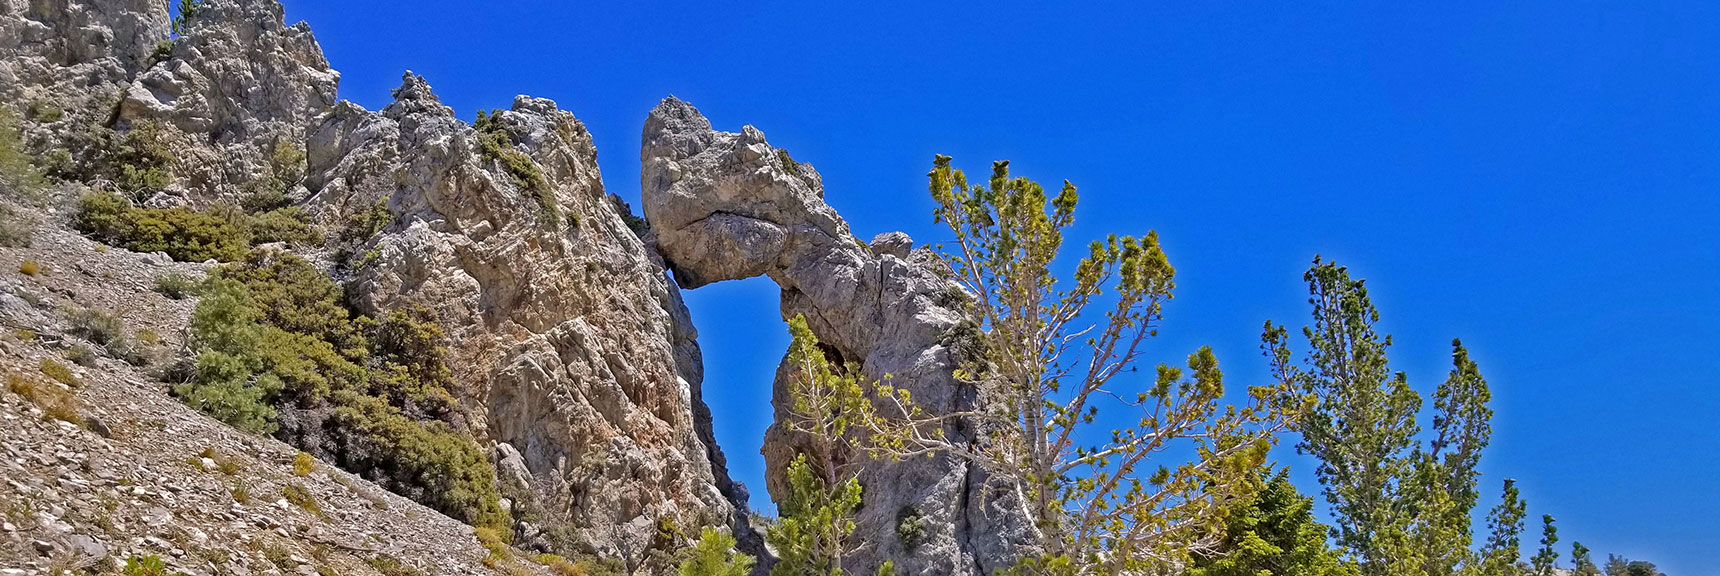 Side Trip to Get a Closer Look at the Arch | Black Rock Sister | Mt Charleston Wilderness | Lee Canyon | Spring Mountains, Nevada